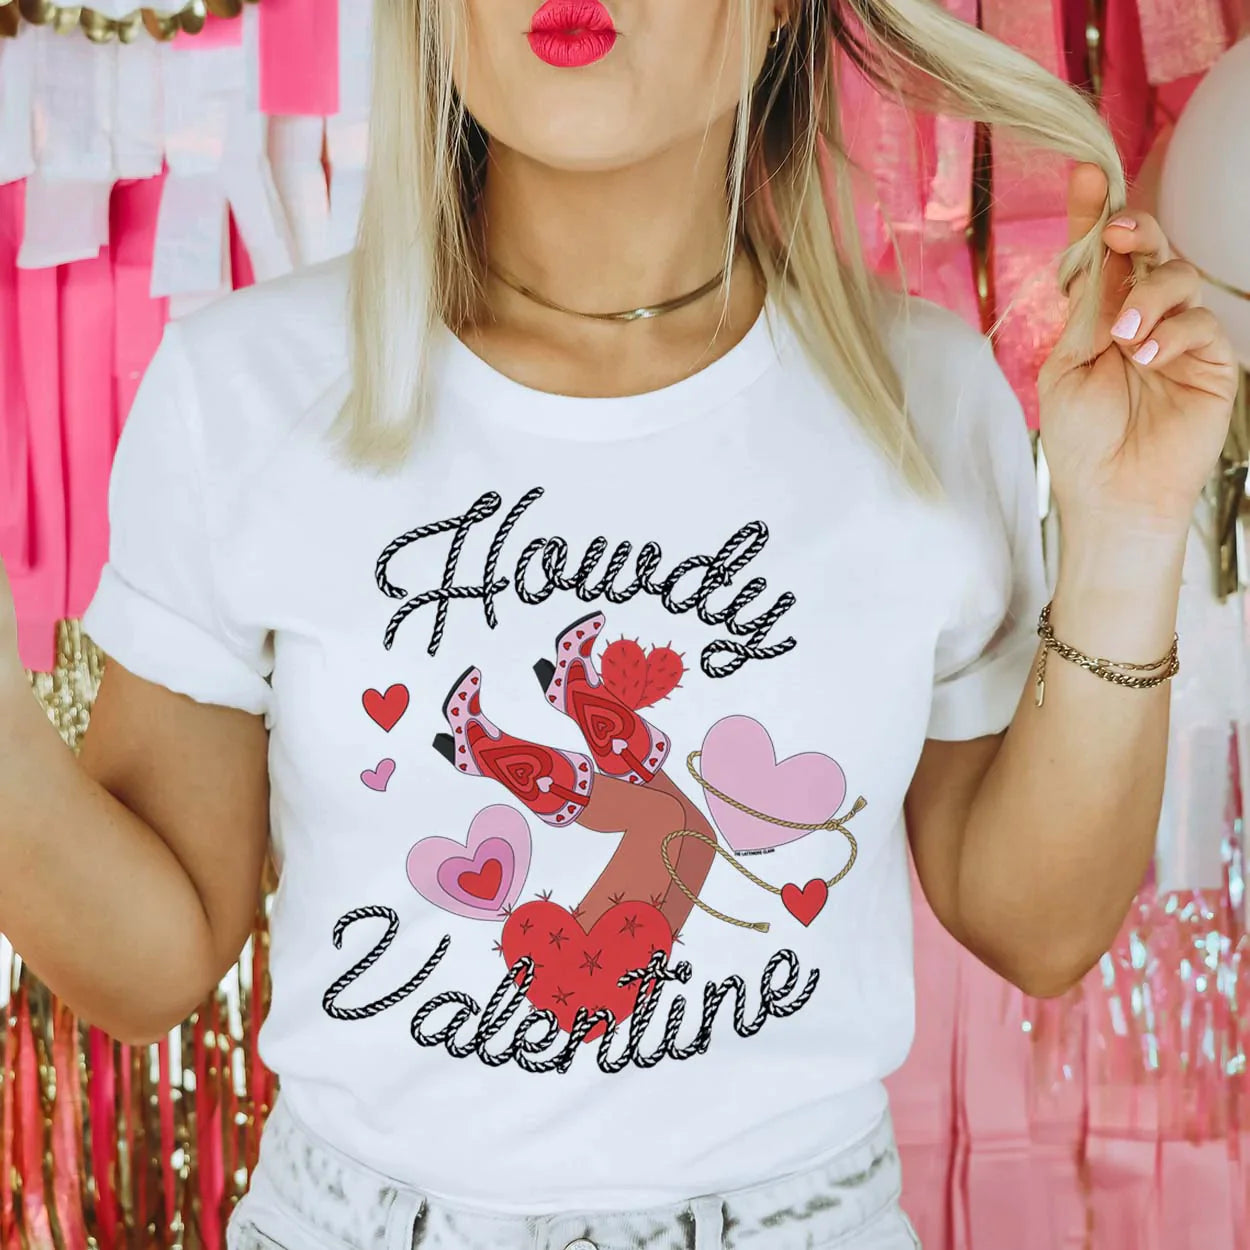 This crew neck white tee is shown here being modeled with rolled sleeves and gold jewelry and jeans.  The graphic says "howdy valentine" in a cursive rope font. There are hearts, one being lassoed, and legs with cute pink and red boots up in the air centered between the "howdy valentine" font. 